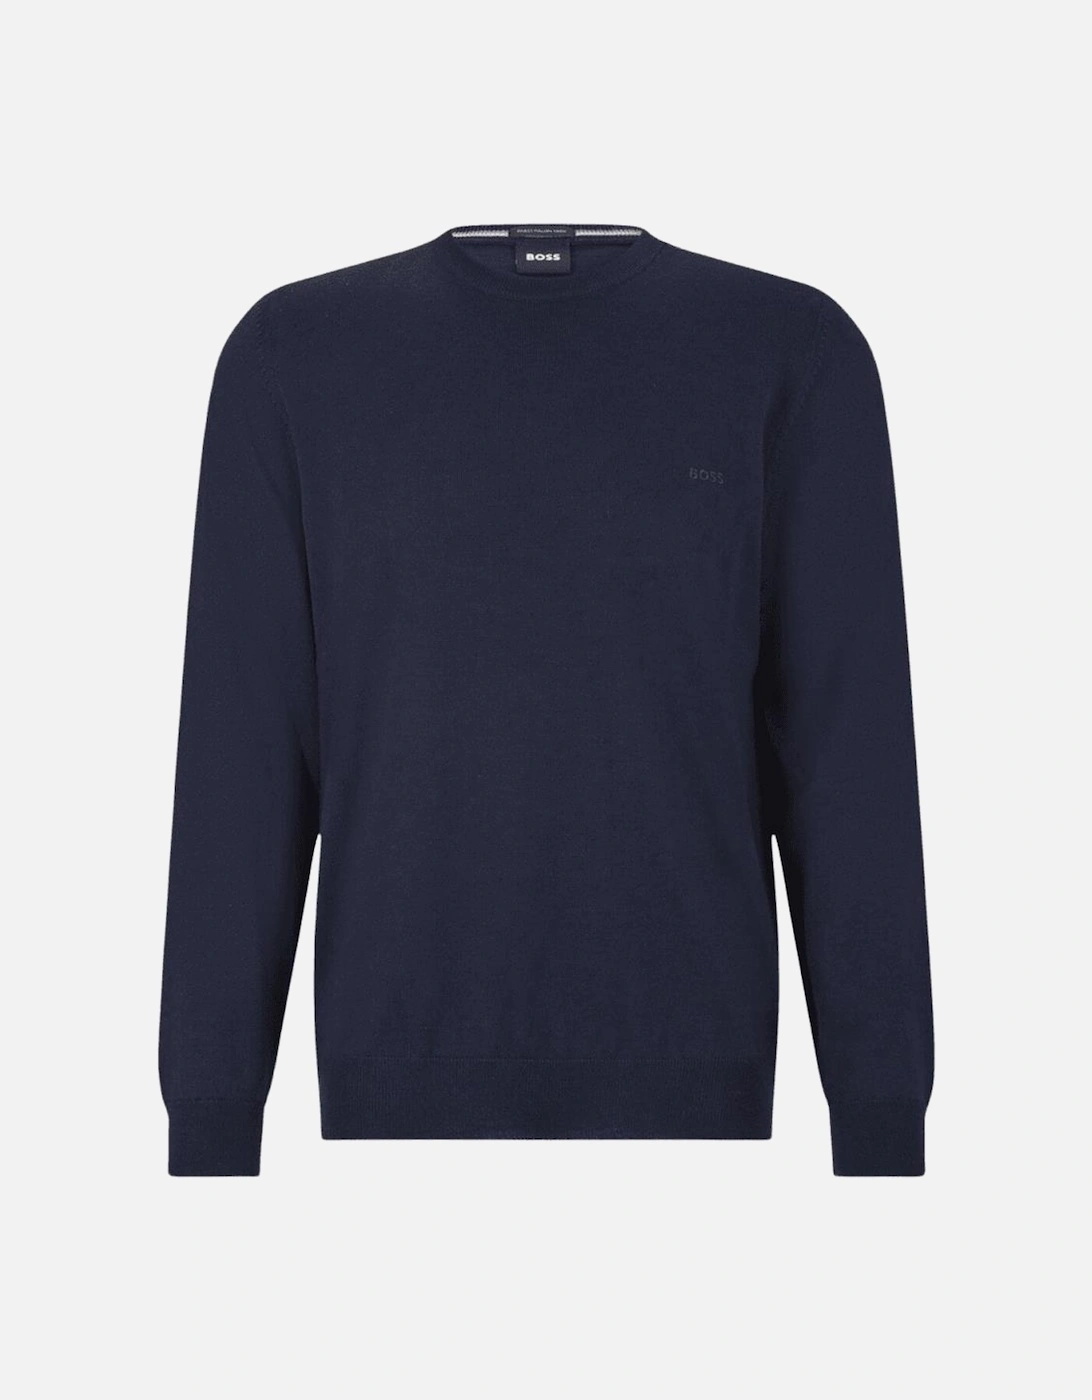 Botto Embroidered Logo Crew Neck Navy Knitted Jumper, 4 of 3